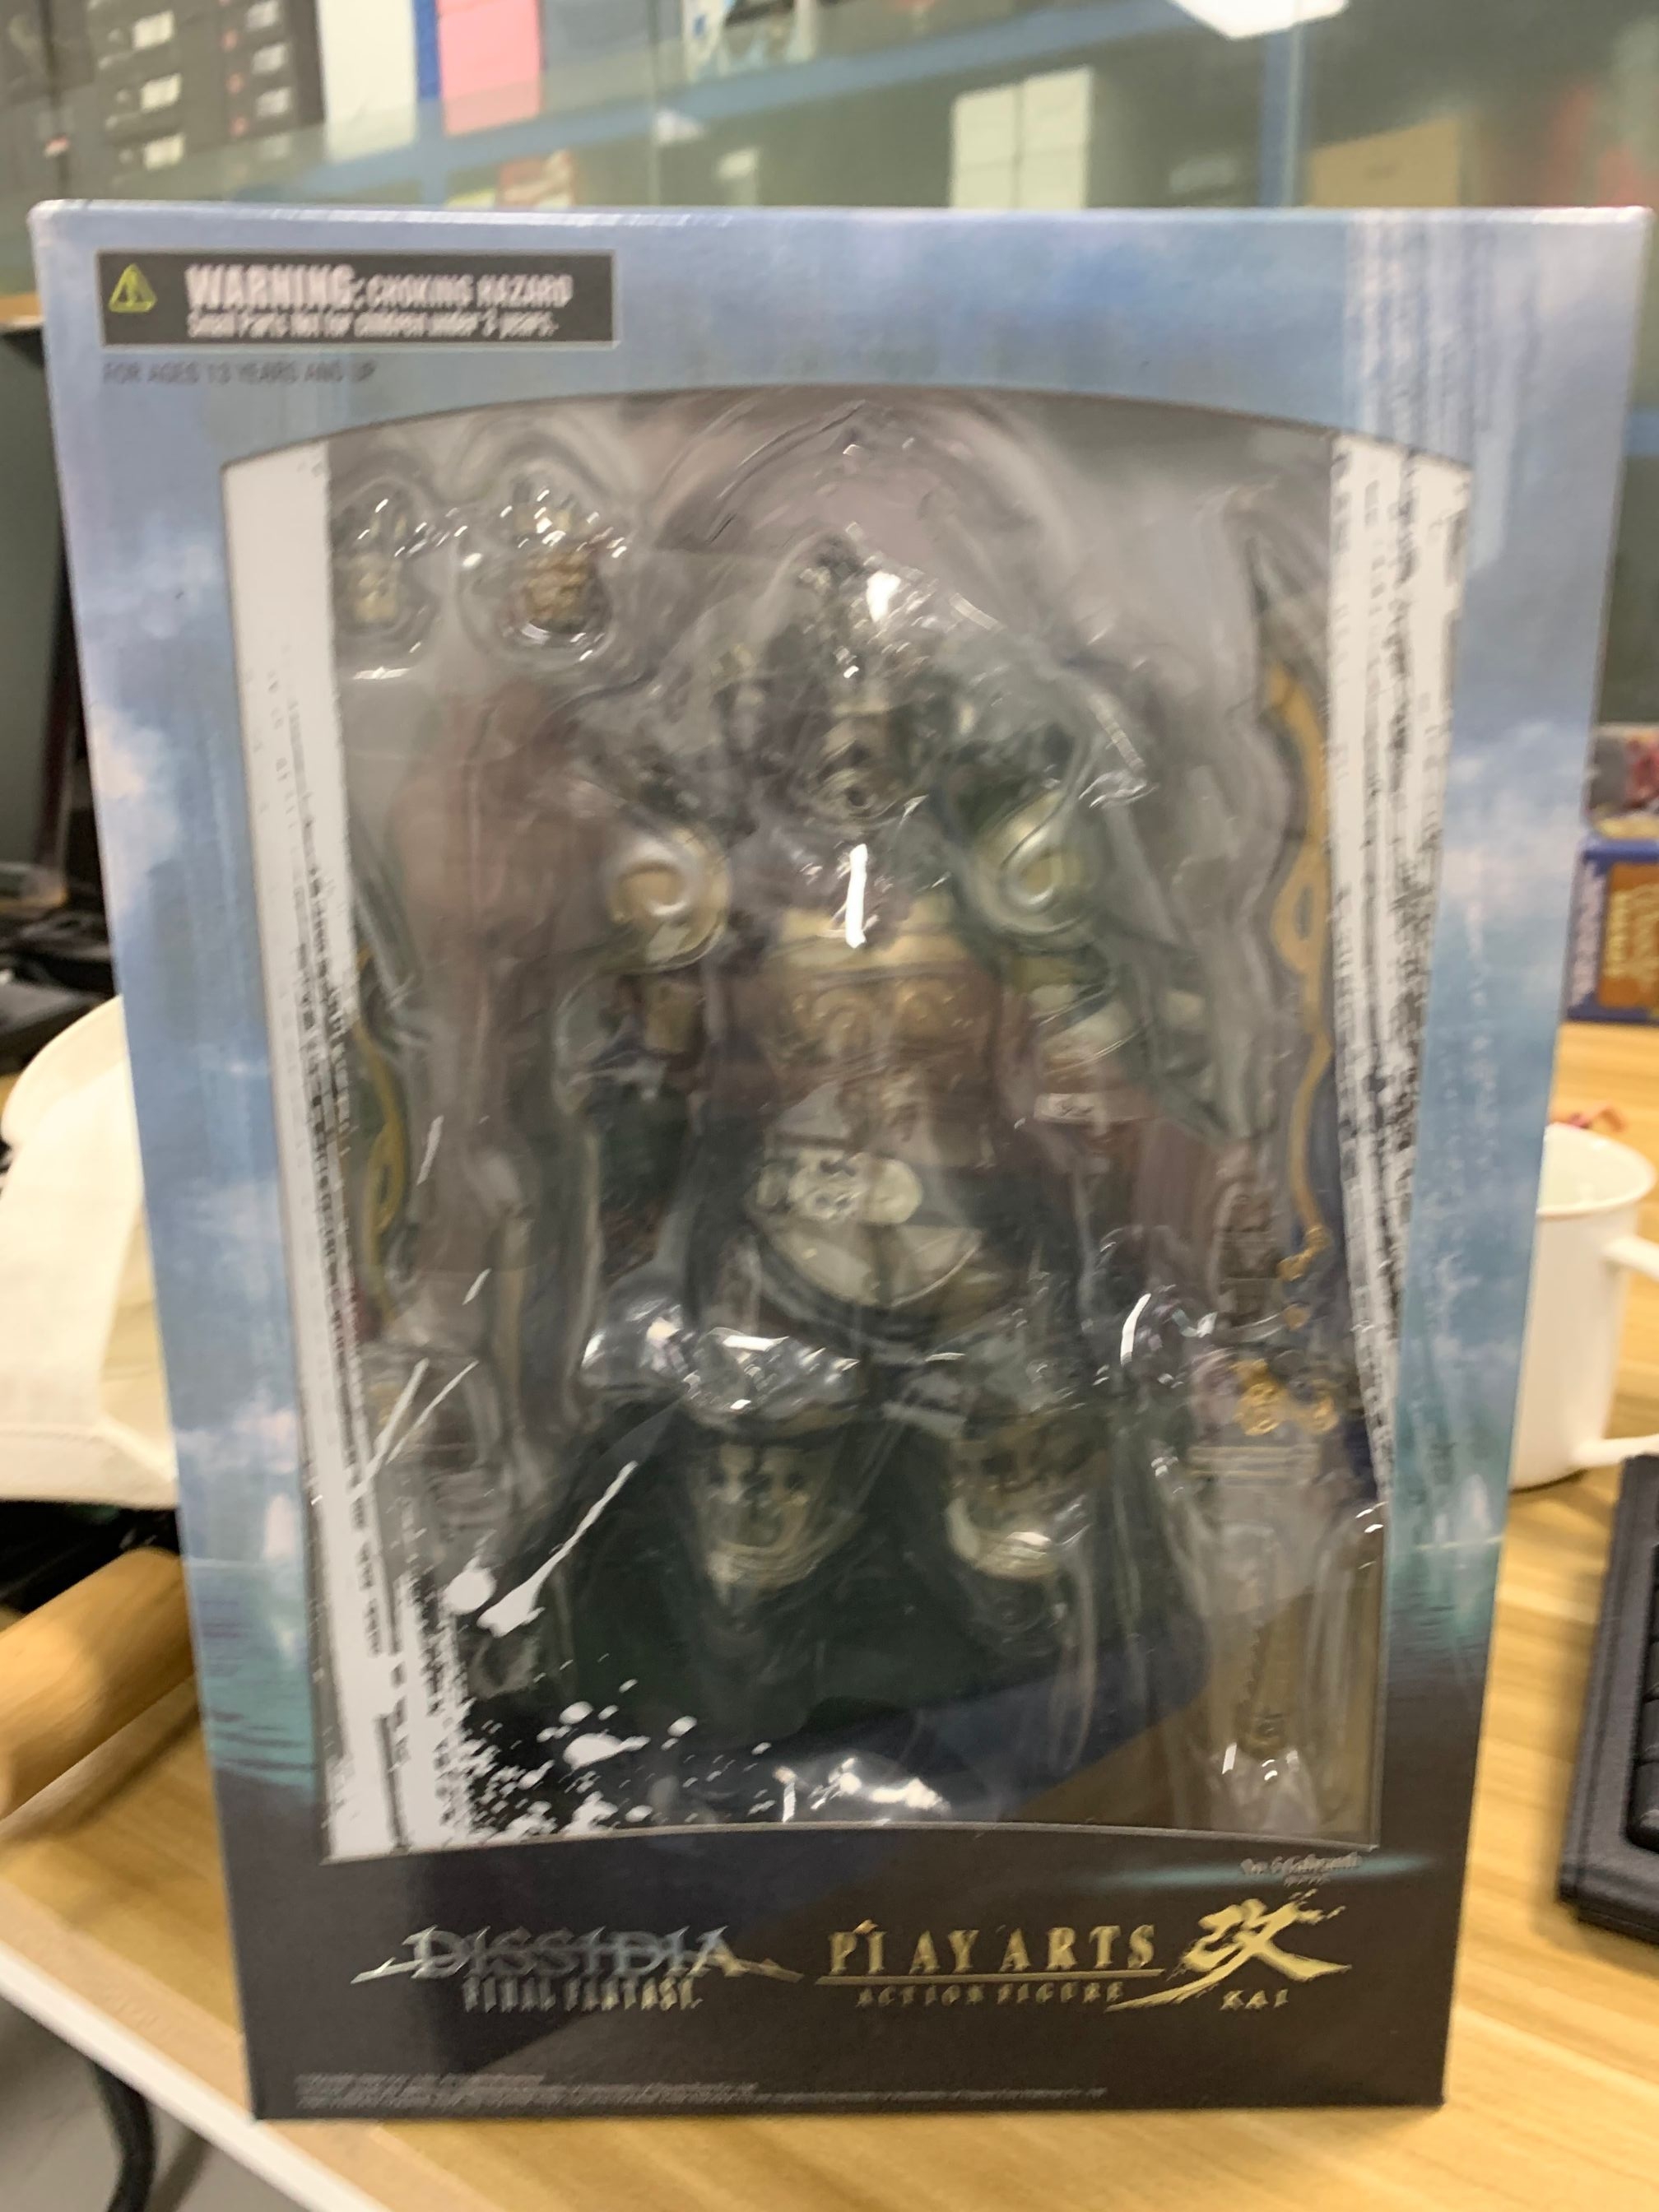 Play Arts Final Fantasy XII Gabranth Action Figure